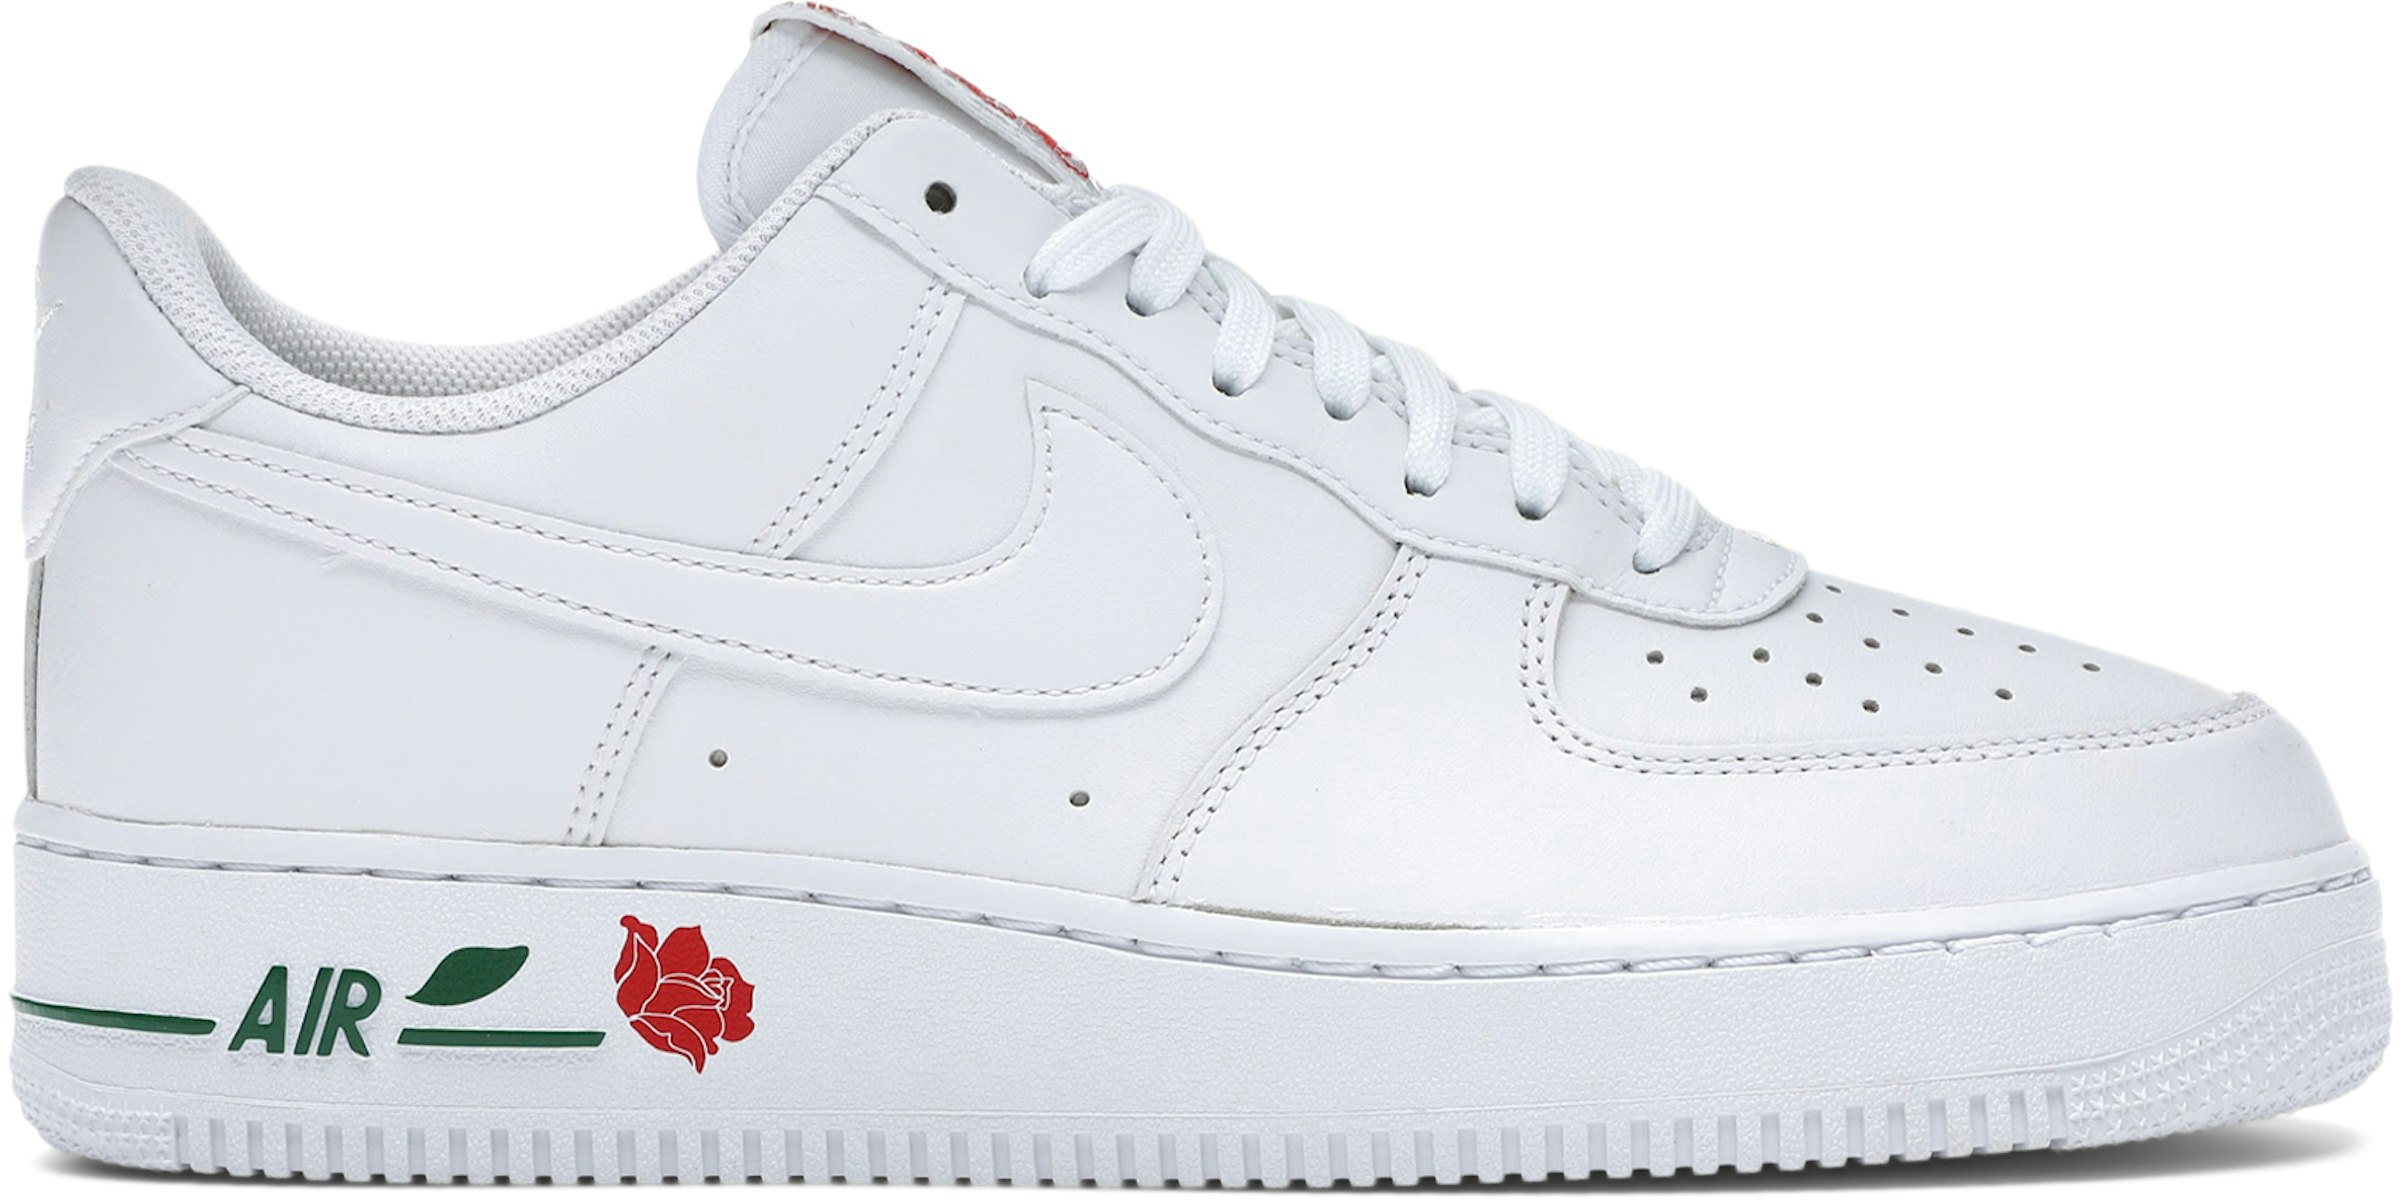 Nike Air Force 1 Low Rose White Hombre - CU6312-100 -